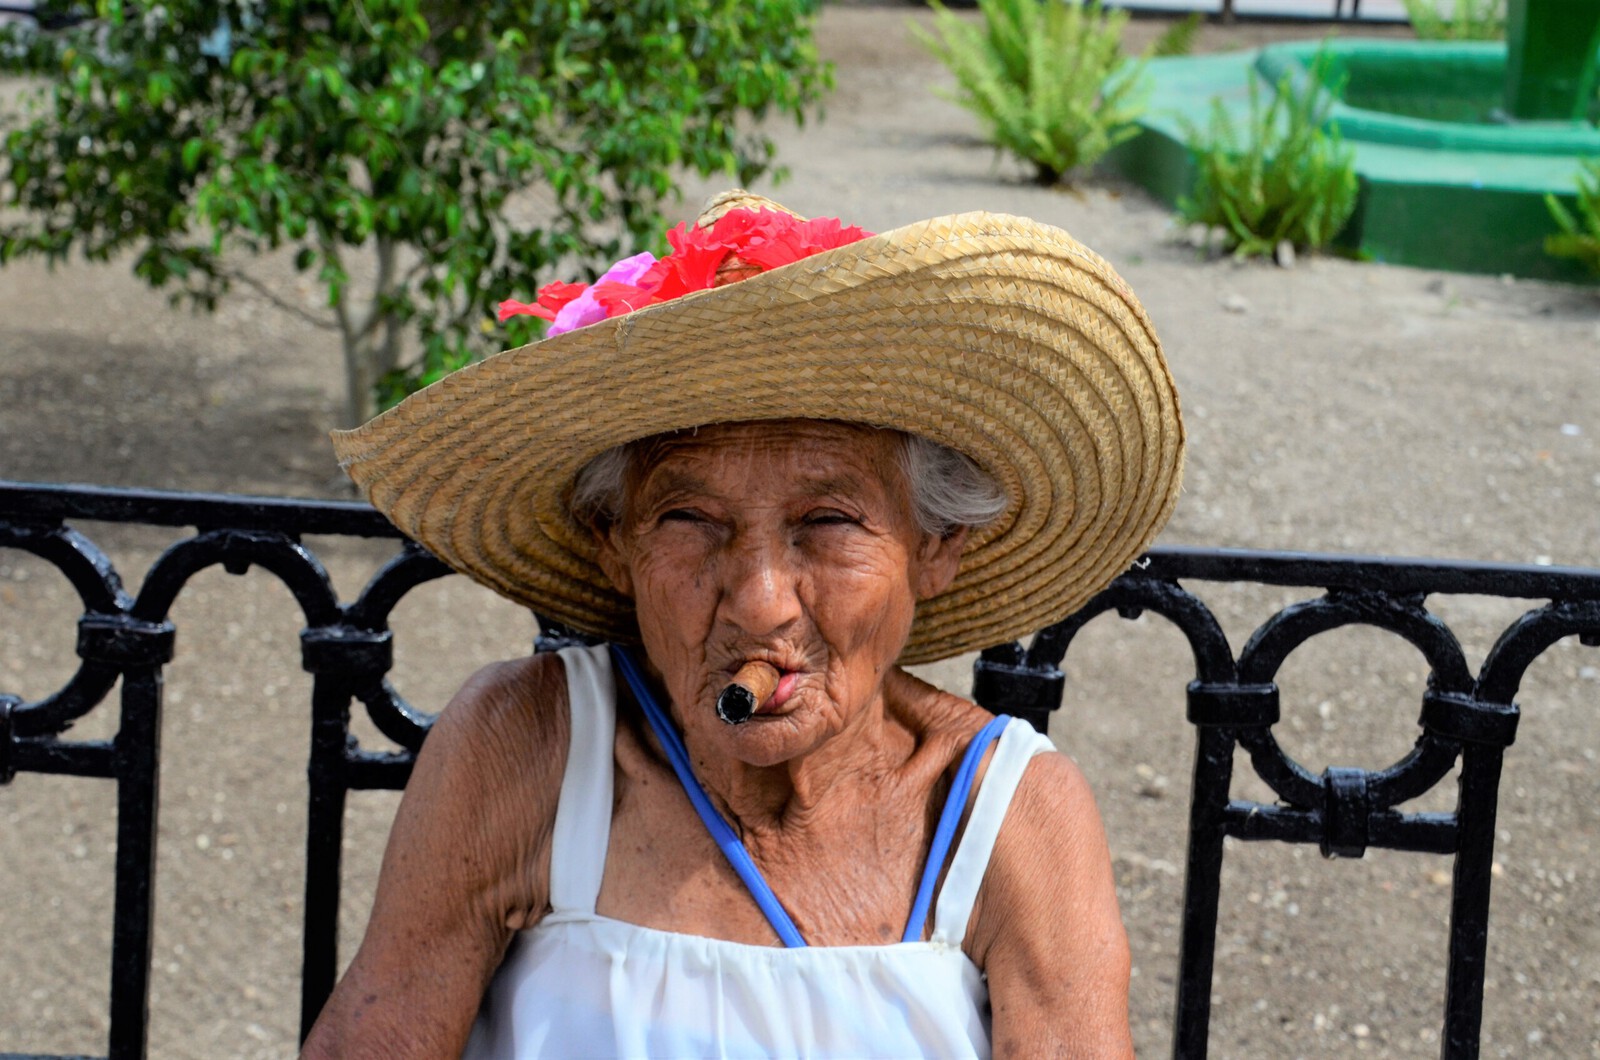 Humans of the world 12/Cuba